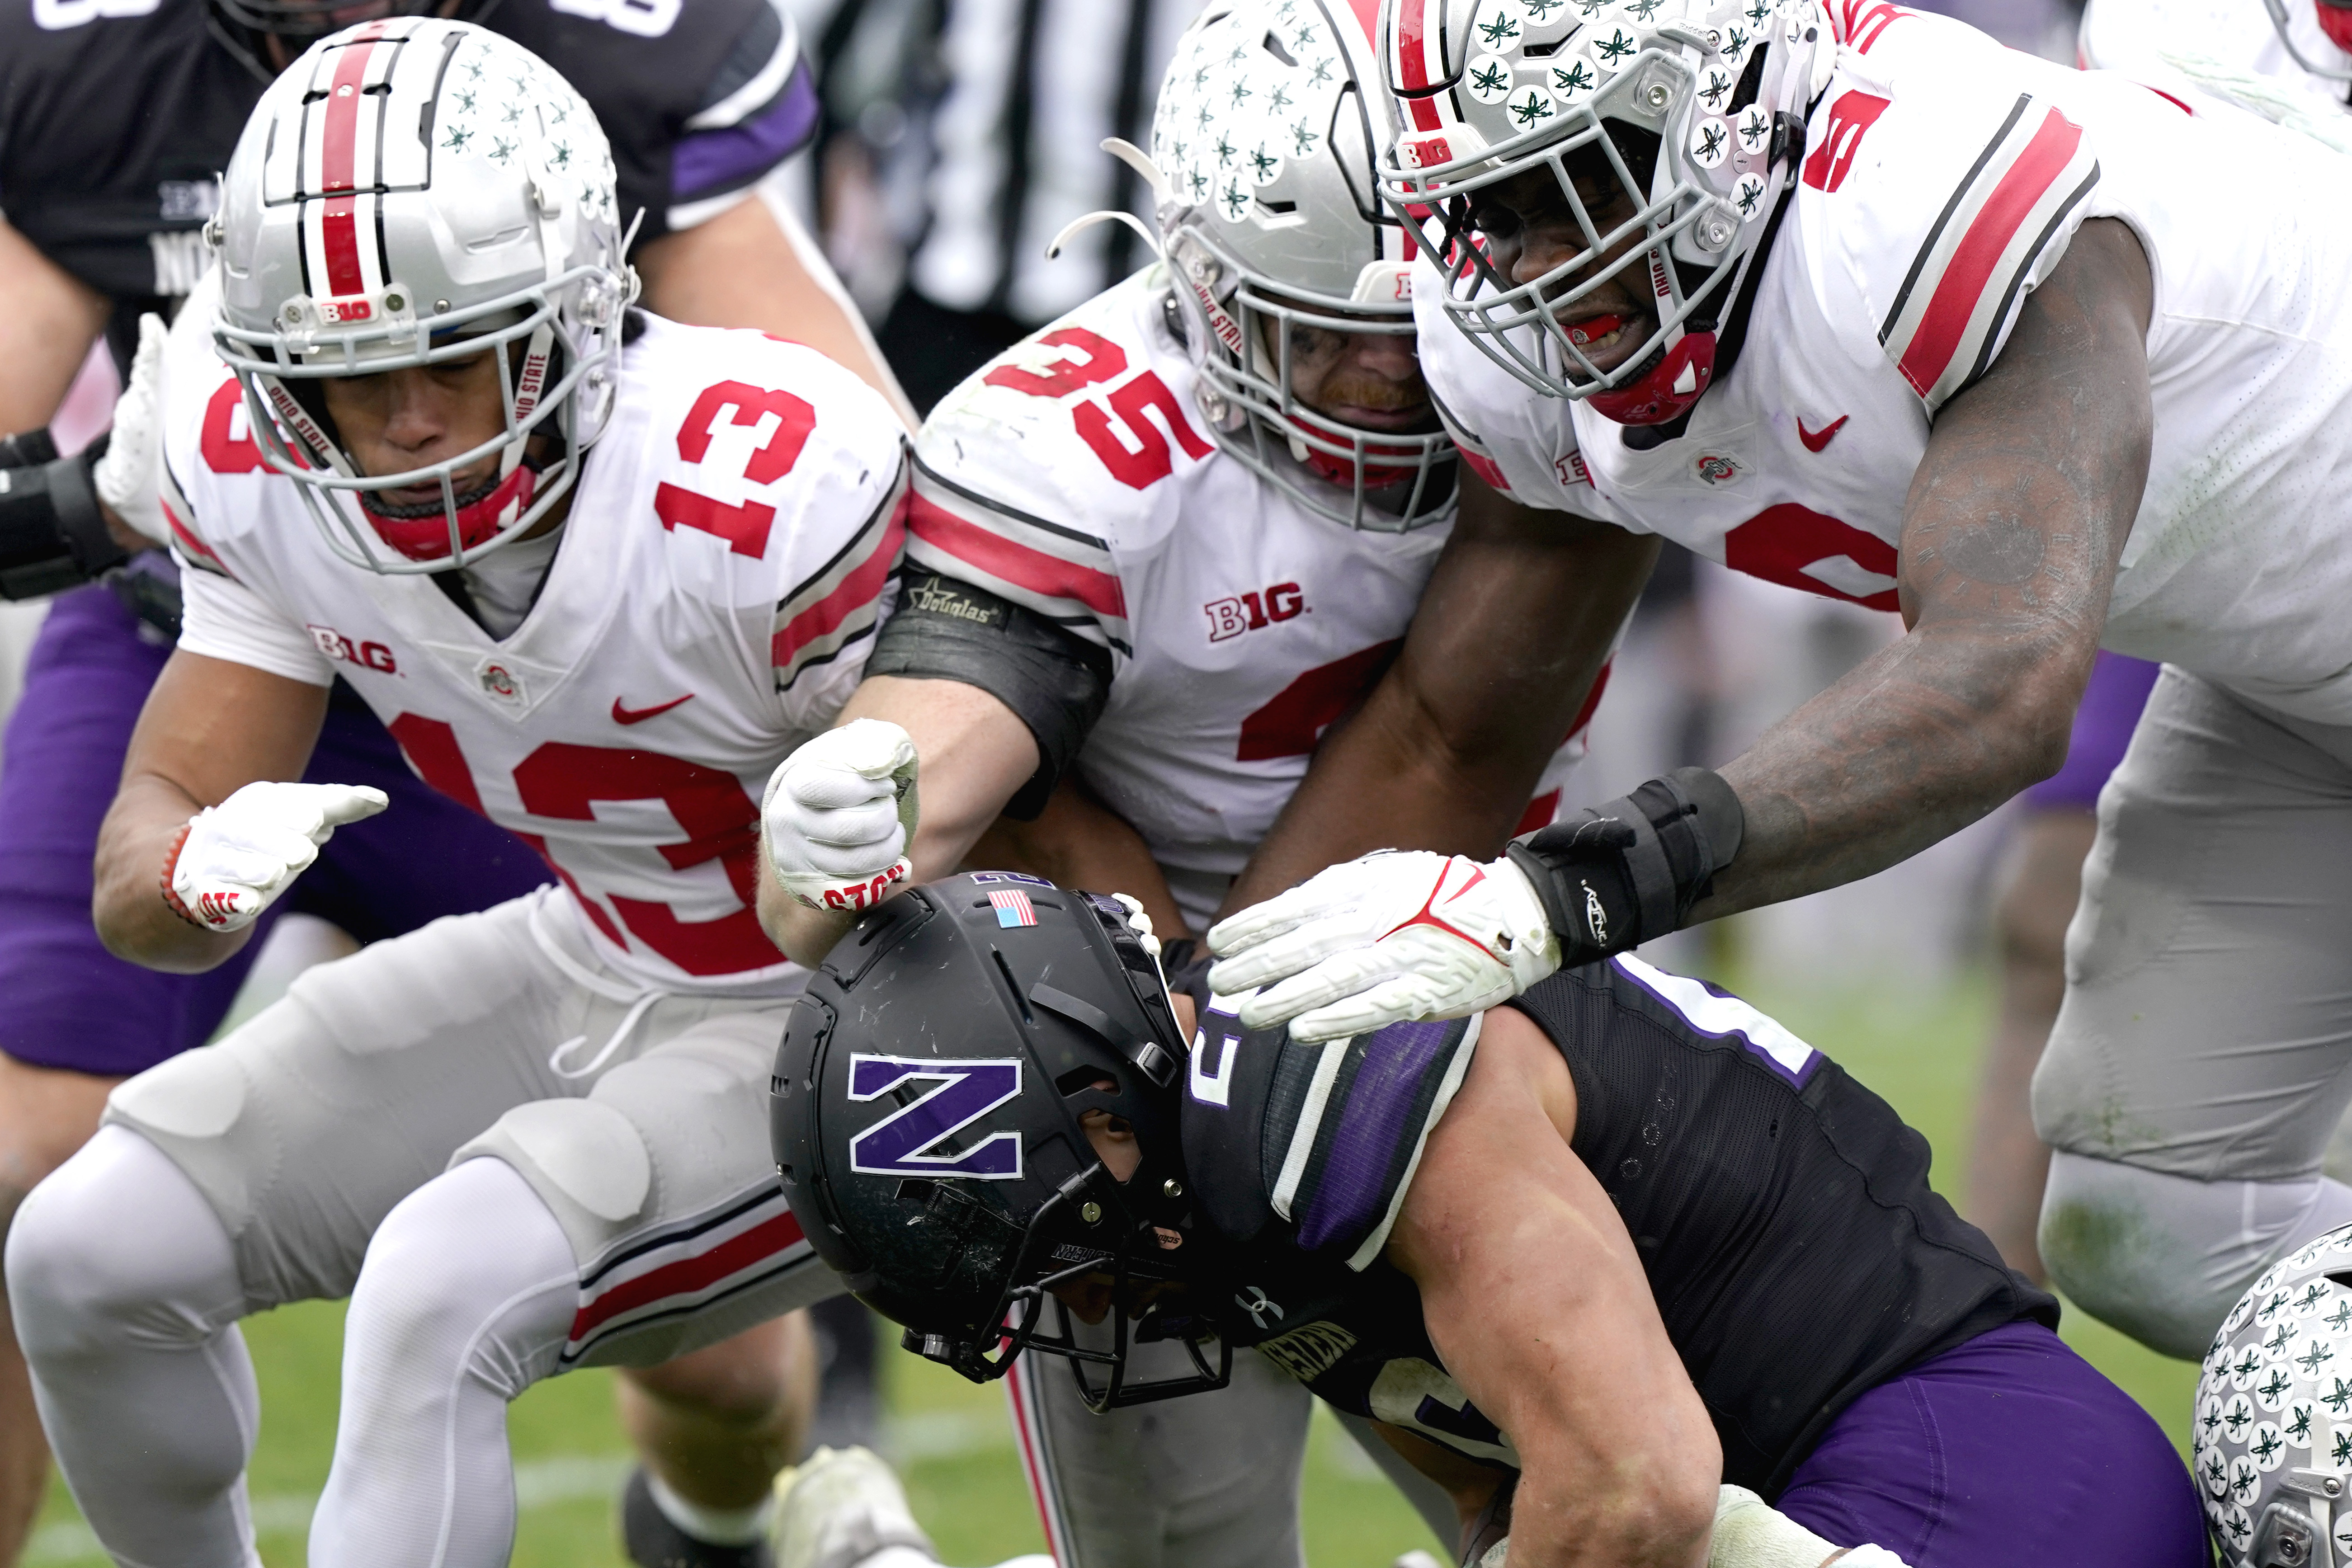 Ohio State football: Evaluating the defense after NFL decisions